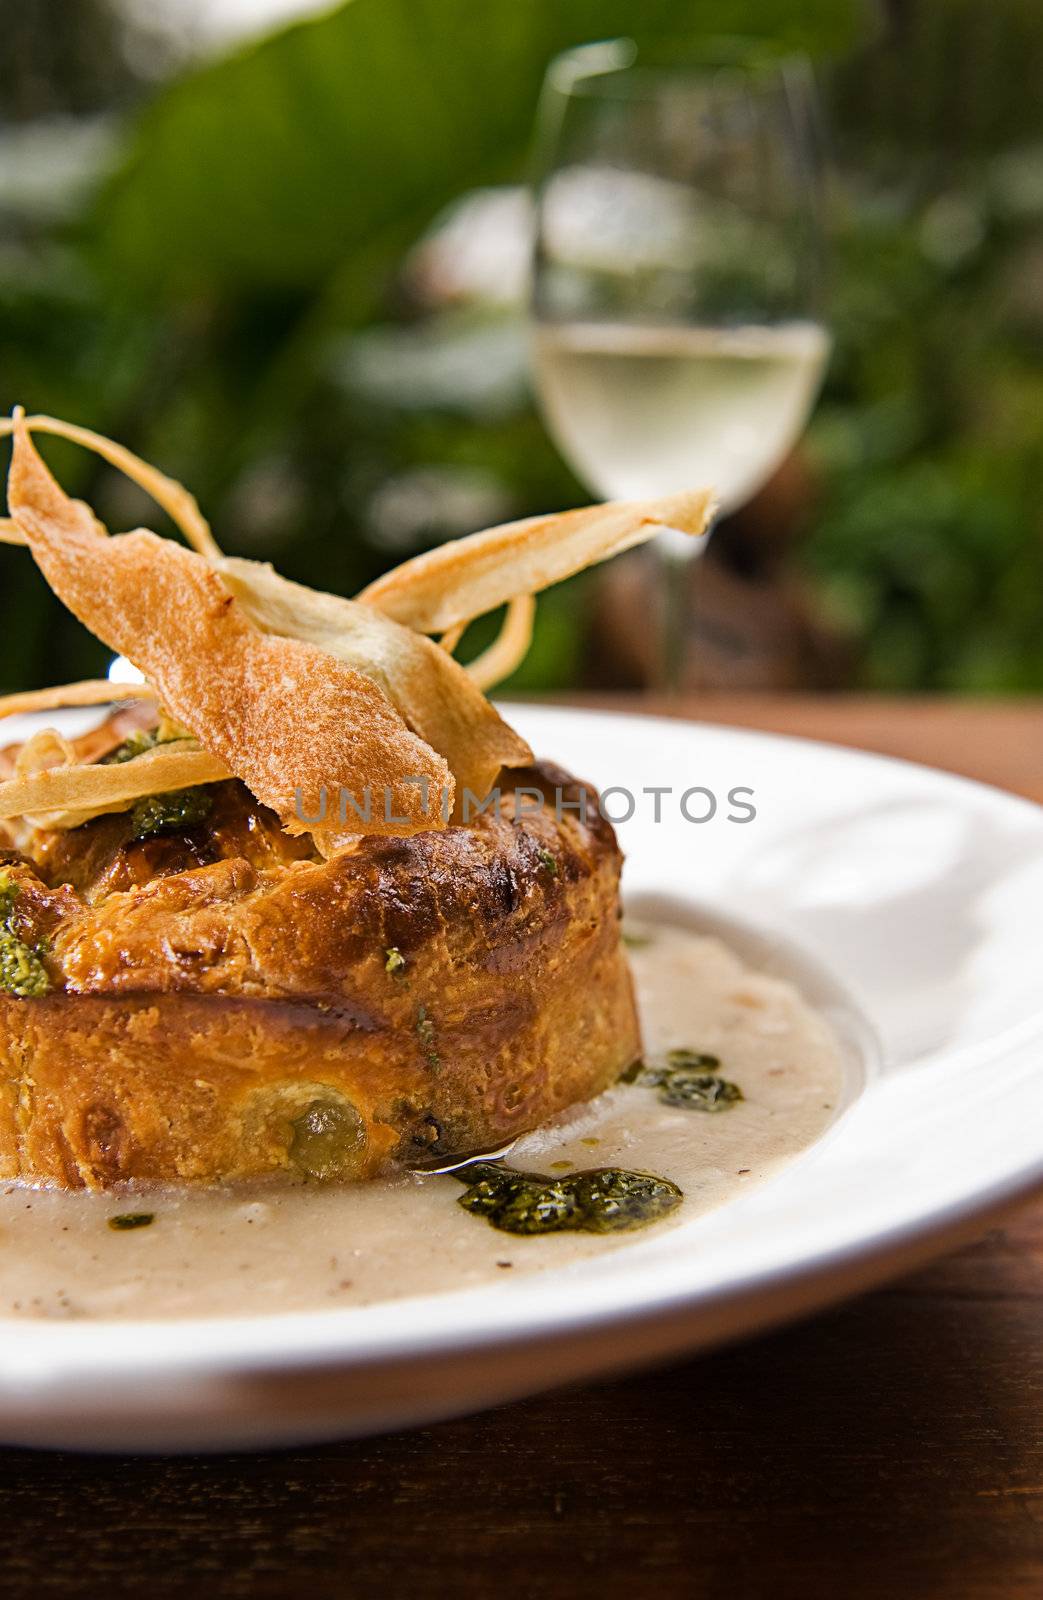 A pie with soup and garnish served with a white wine.